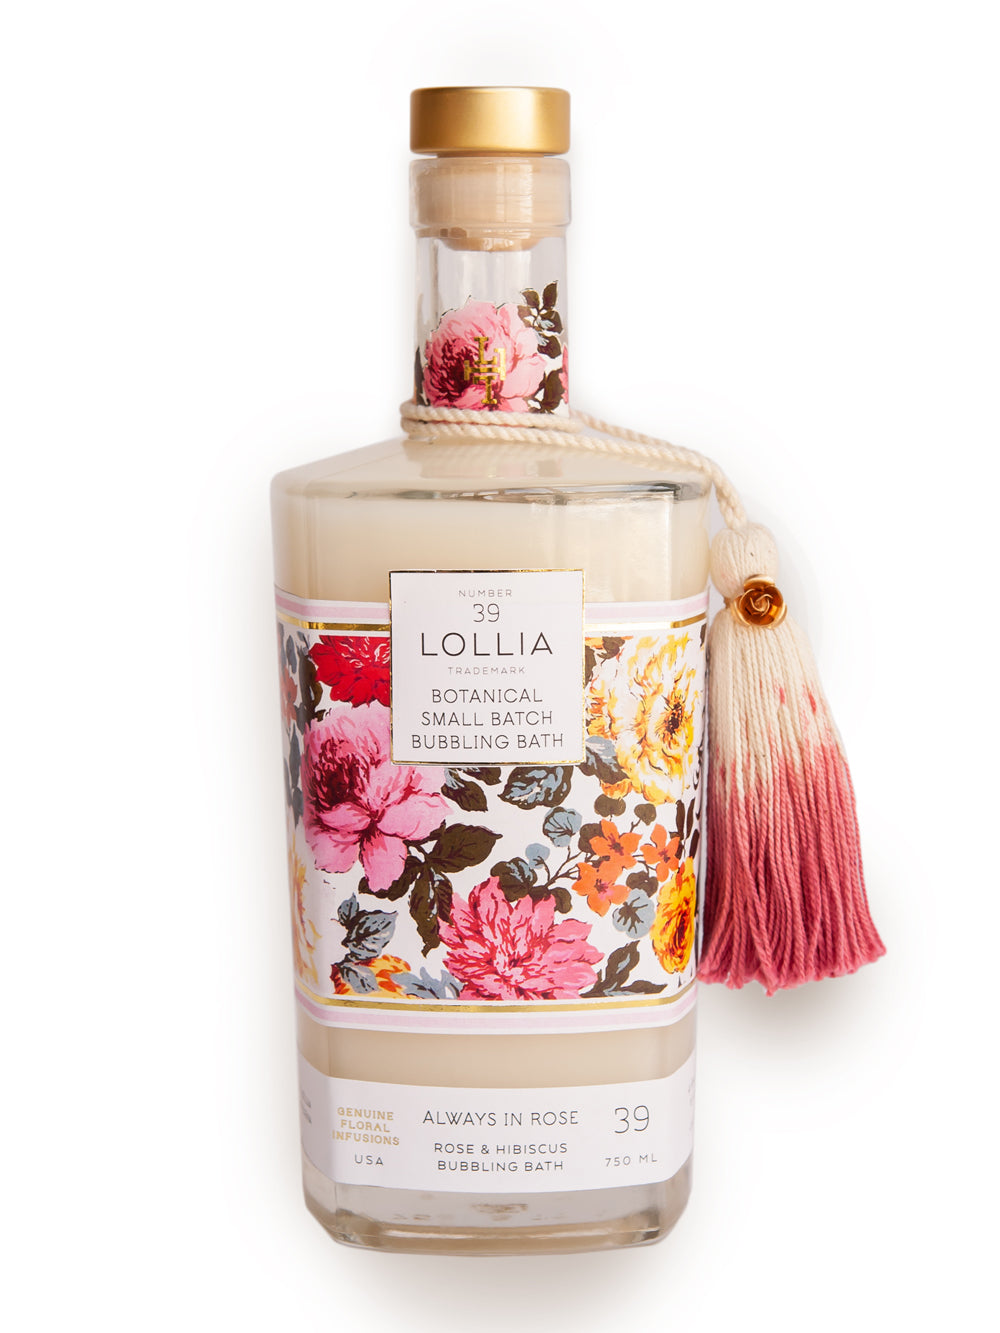 A bottle of Margot Elena's Lollia Always in Rose Bubble Bath, labeled "always in rose," decorated with colorful floral designs and topped with a pink tasseled cap.